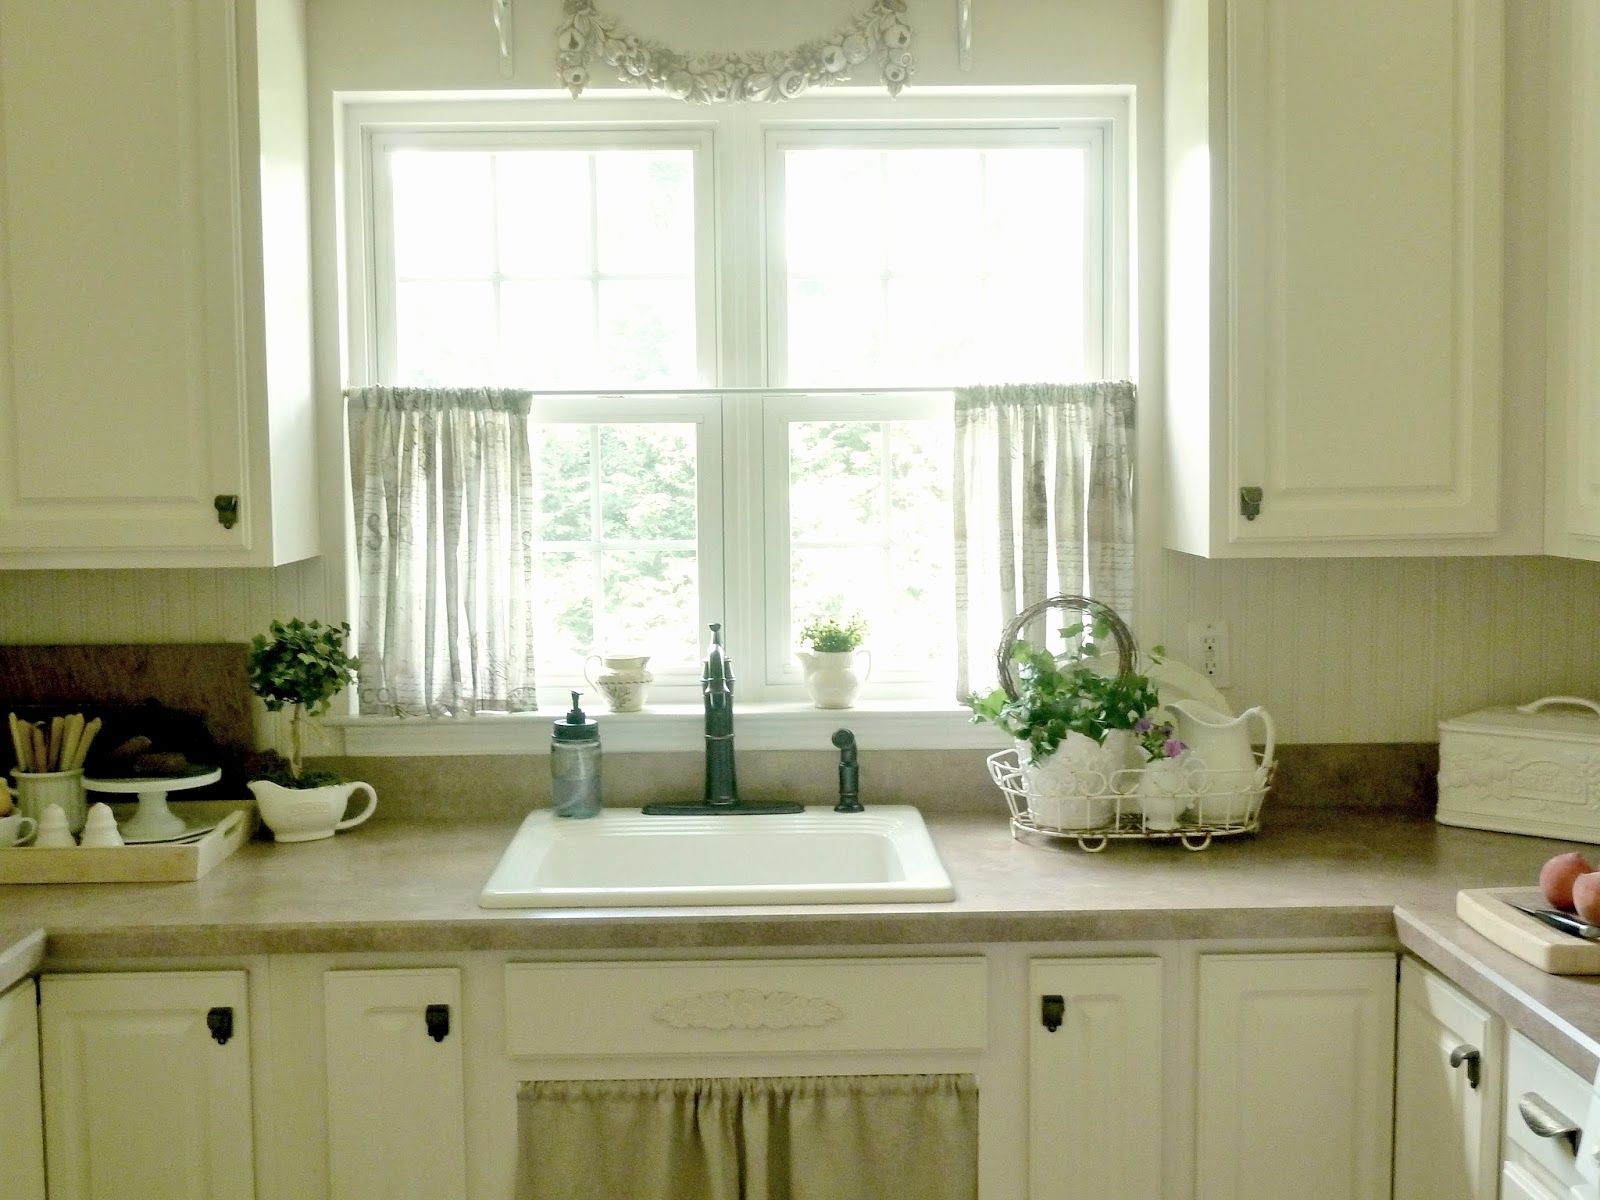 Small Farmhouse Kitchen With Curtains : Home Designs And With Farmhouse Kitchen Curtains (View 16 of 20)